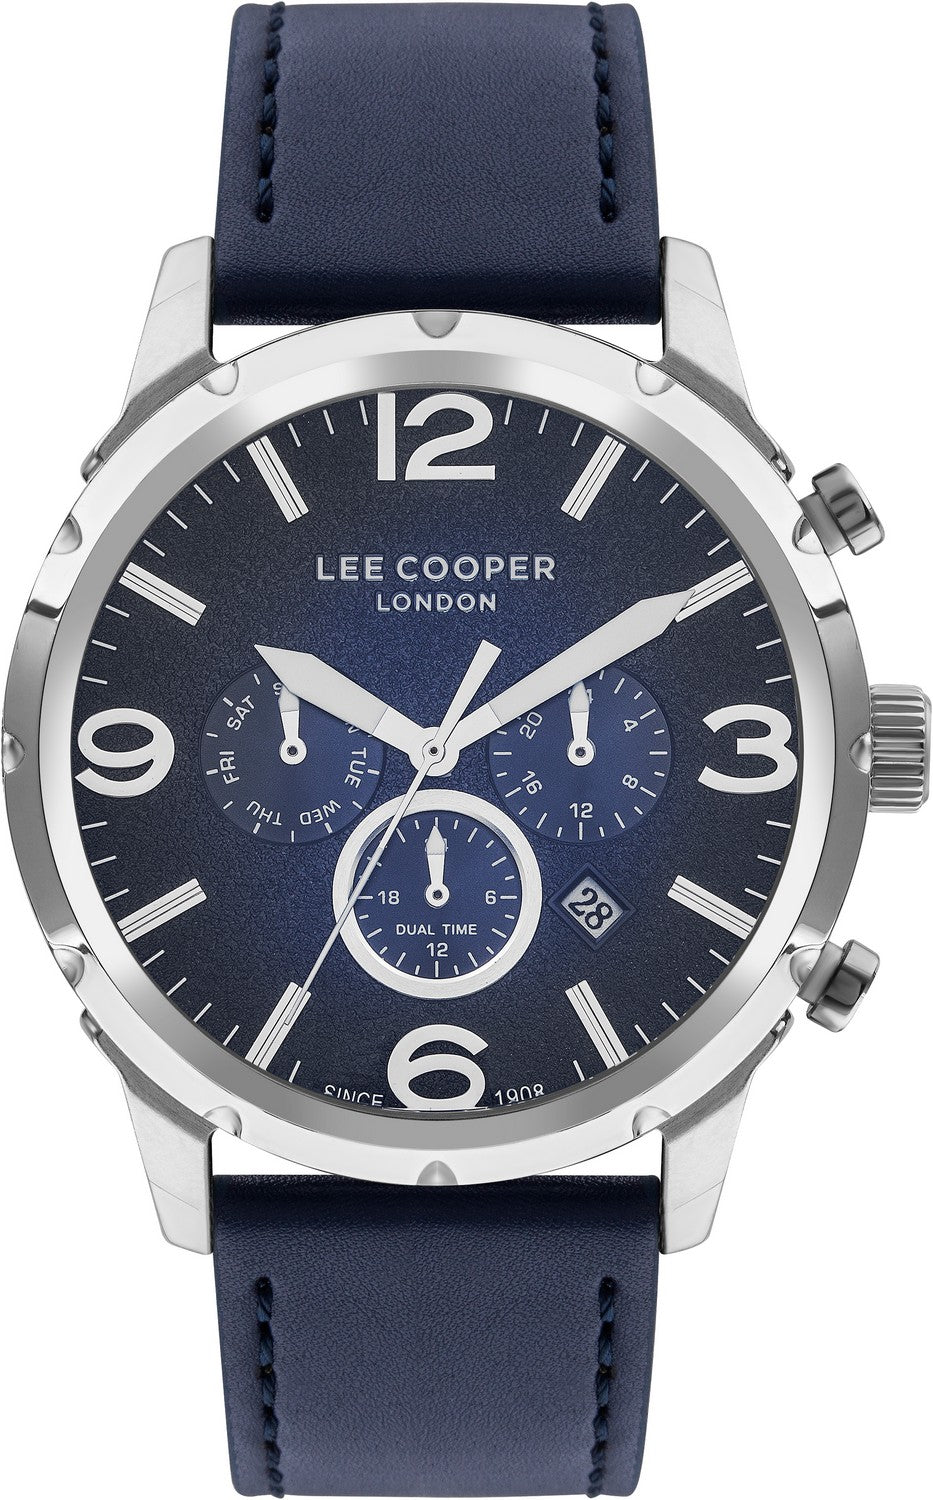 Lee Cooper Multi Function for Men's Watch | Watches & Accessories | Halabhj.com